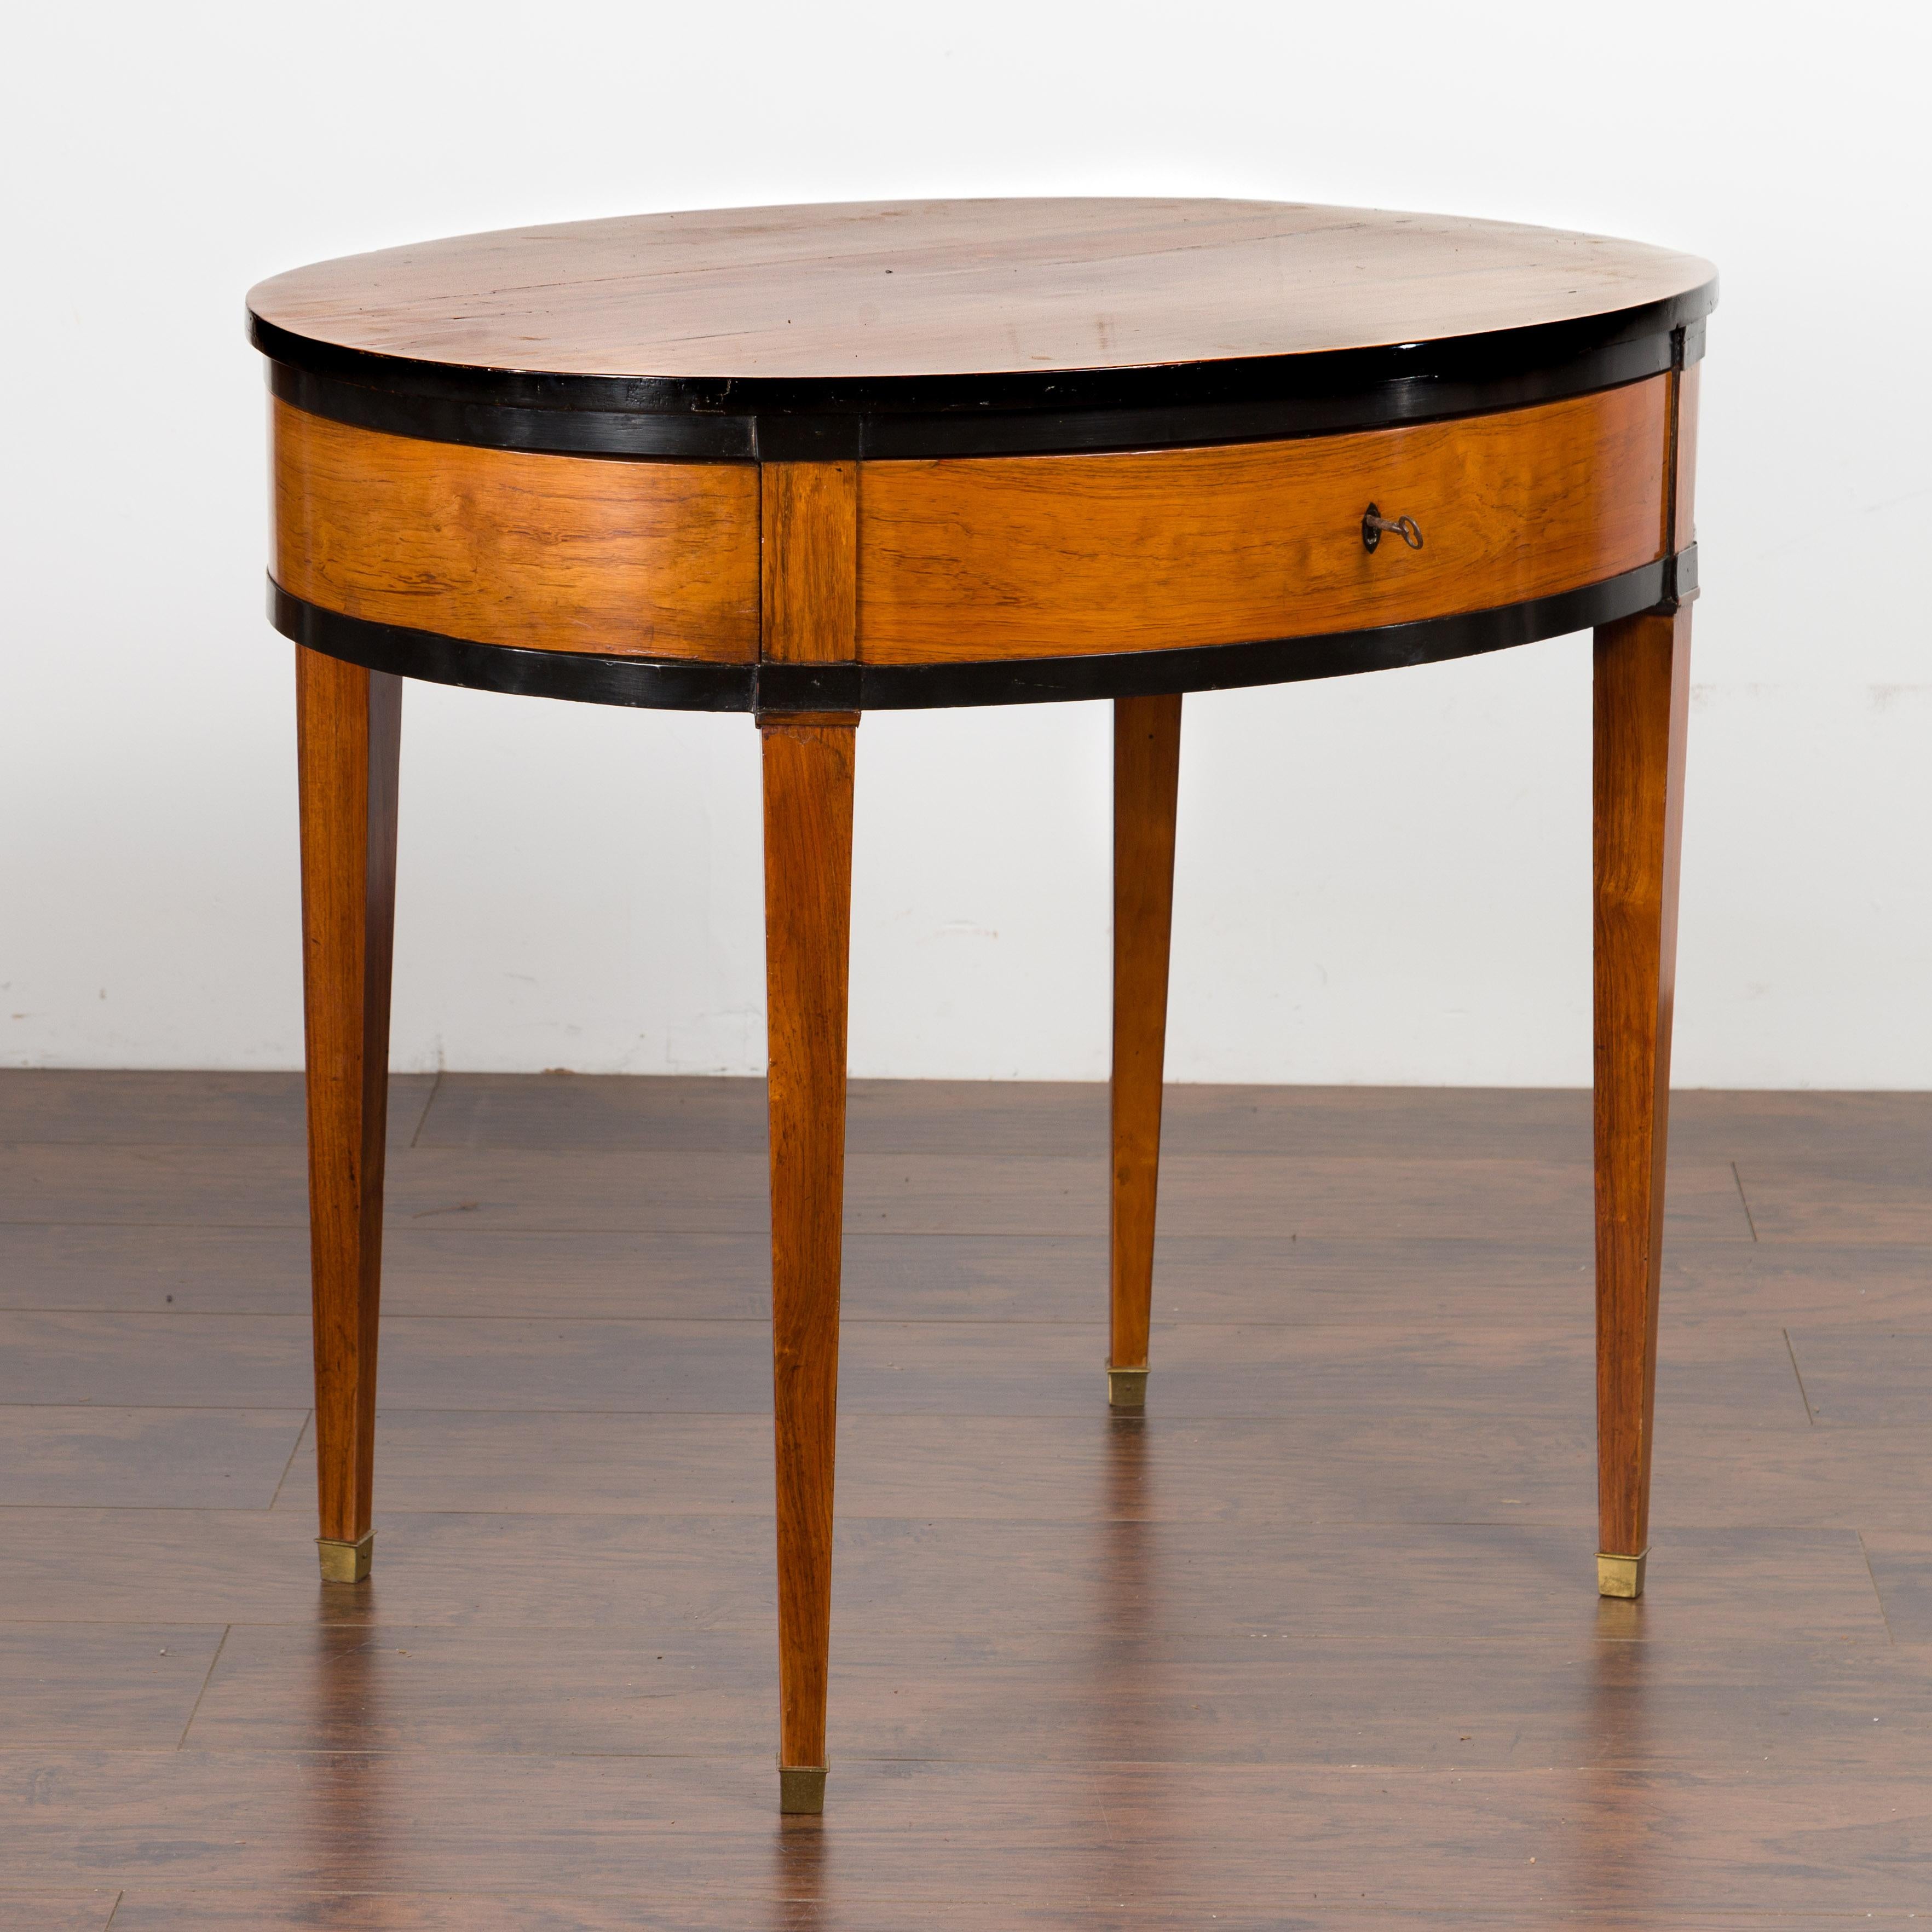 An Austrian Biedermeier period oval top table from the mid-19th century, with ebonized accents and single drawer. Created in Austria during the second quarter of the 19th century, this Biedermeier table features an oval top sitting above a single